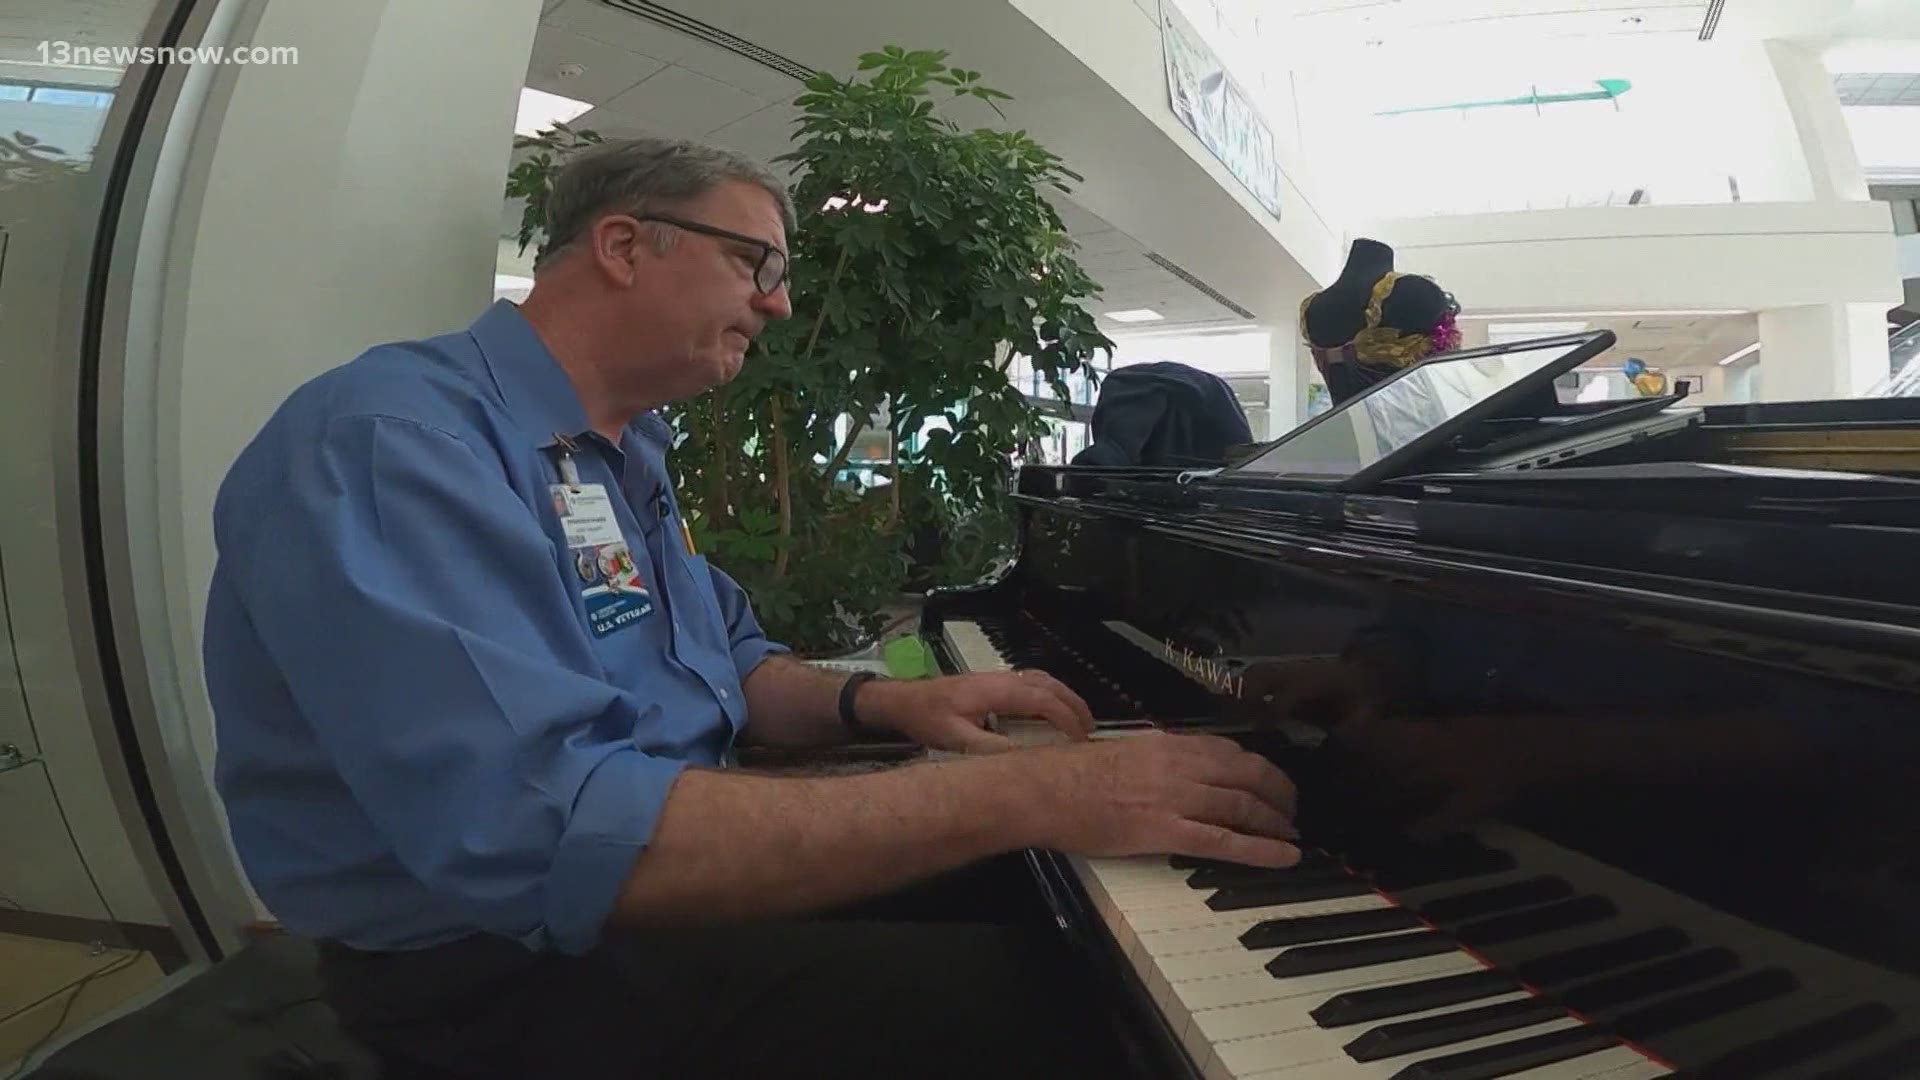 Retired Navy sailor Jonathan Moore is using his passion for music to soothe nerves and lift spirits at Chesapeake Regional Medical Center.